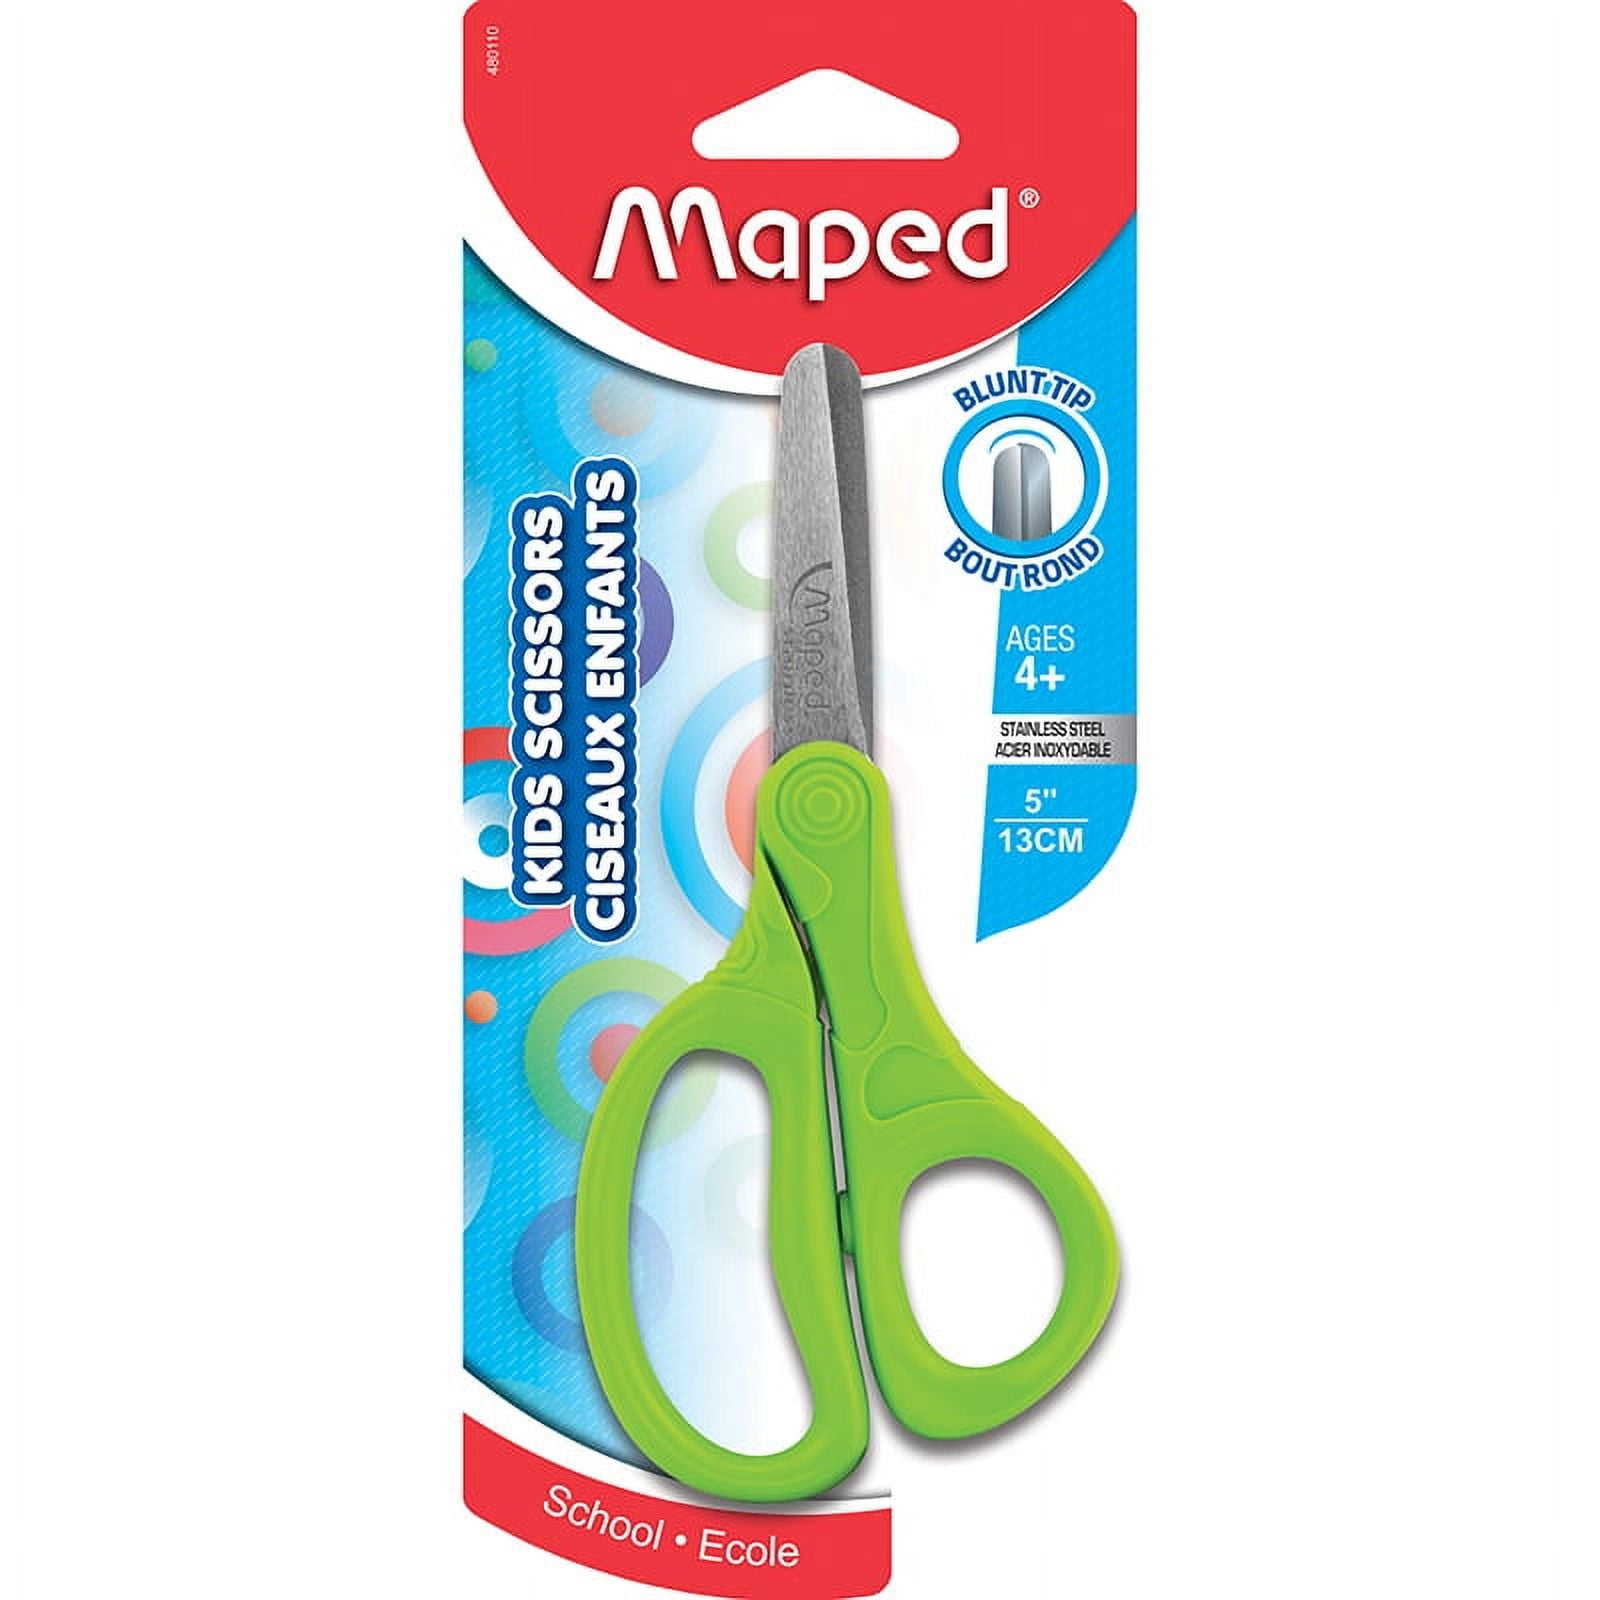 Maped Helix USA Koopy Spring-Assisted Educational Scissors, Kids, 5 Inch,  Blunt Tip, Right Handed Use (470249US),Black/White